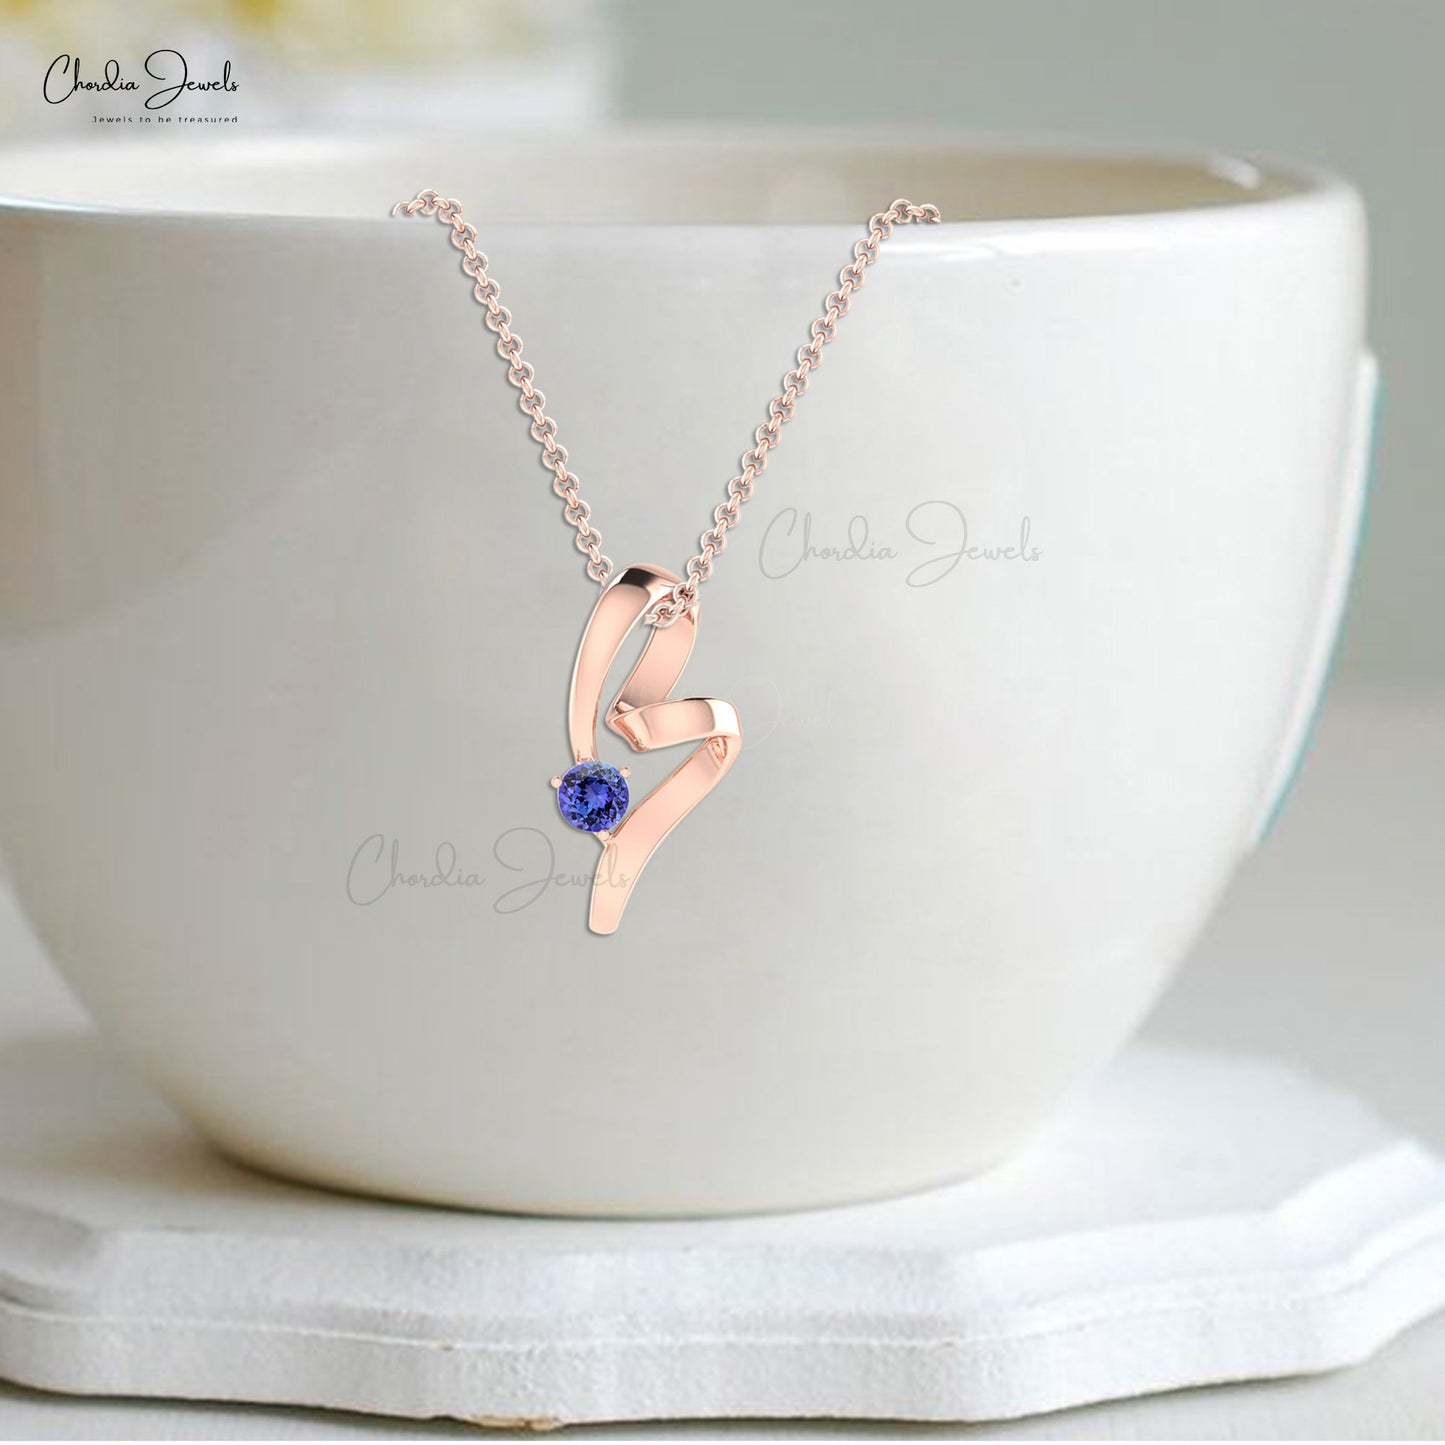 Trendy Stylish 5mm Round Cut Natural Tanzanite Twisted Pendant Necklace 14k Solid Gold Light Weight Jewelry For Birthday Gift